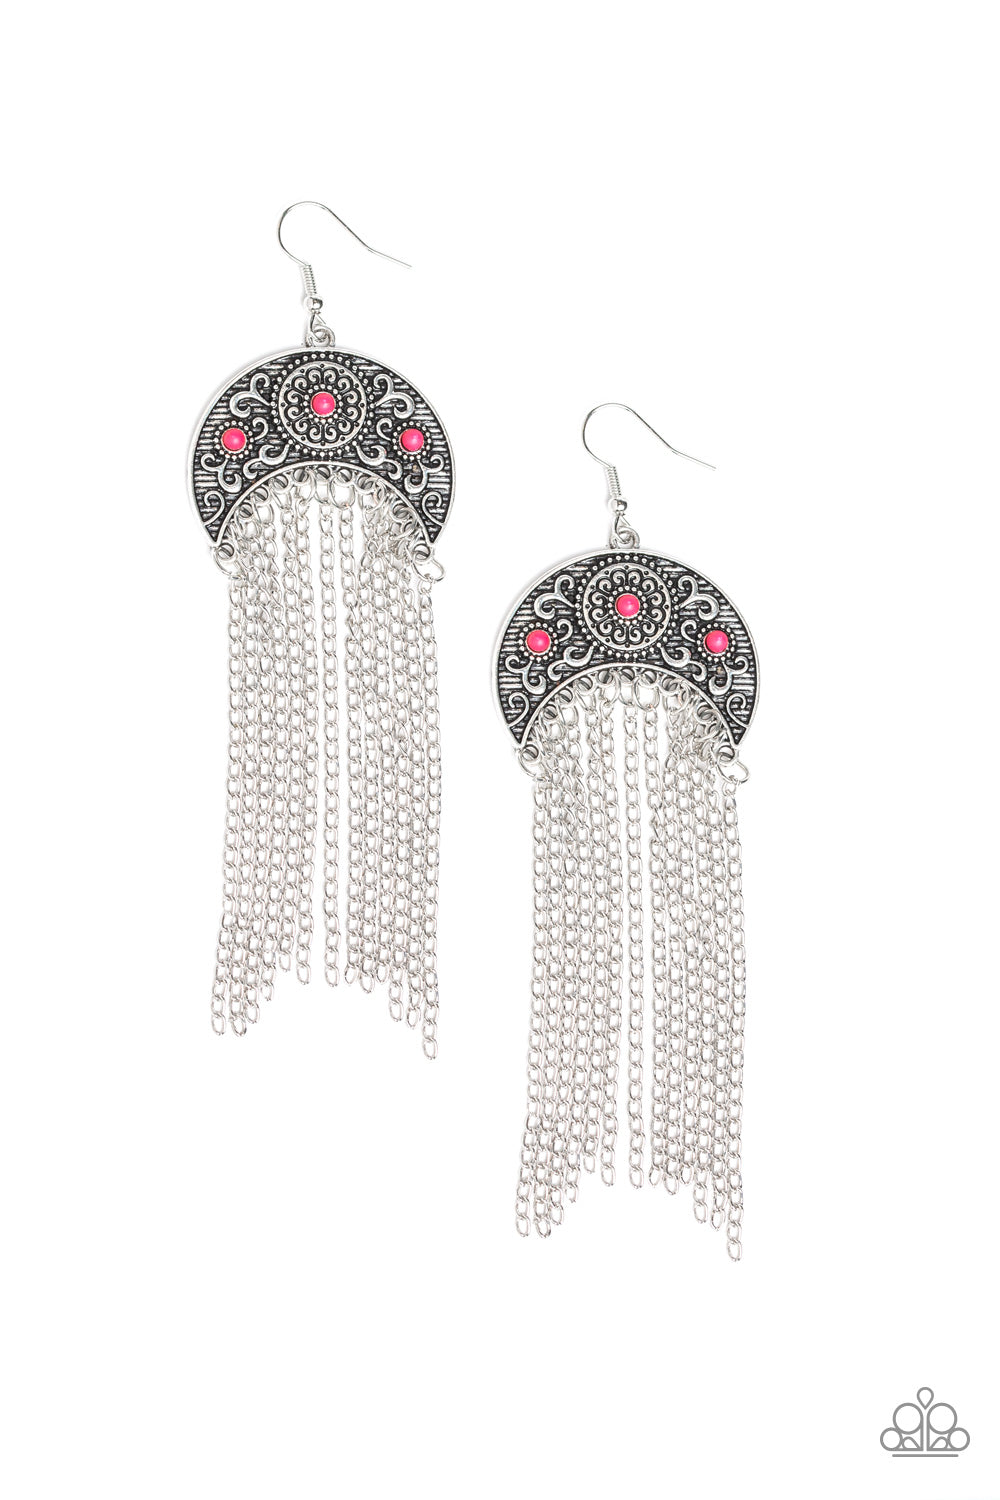 Lunar Melody Pink Paparazzi Earrings Cashmere Pink Jewels - Cashmere Pink Jewels & Accessories, Cashmere Pink Jewels & Accessories - Paparazzi